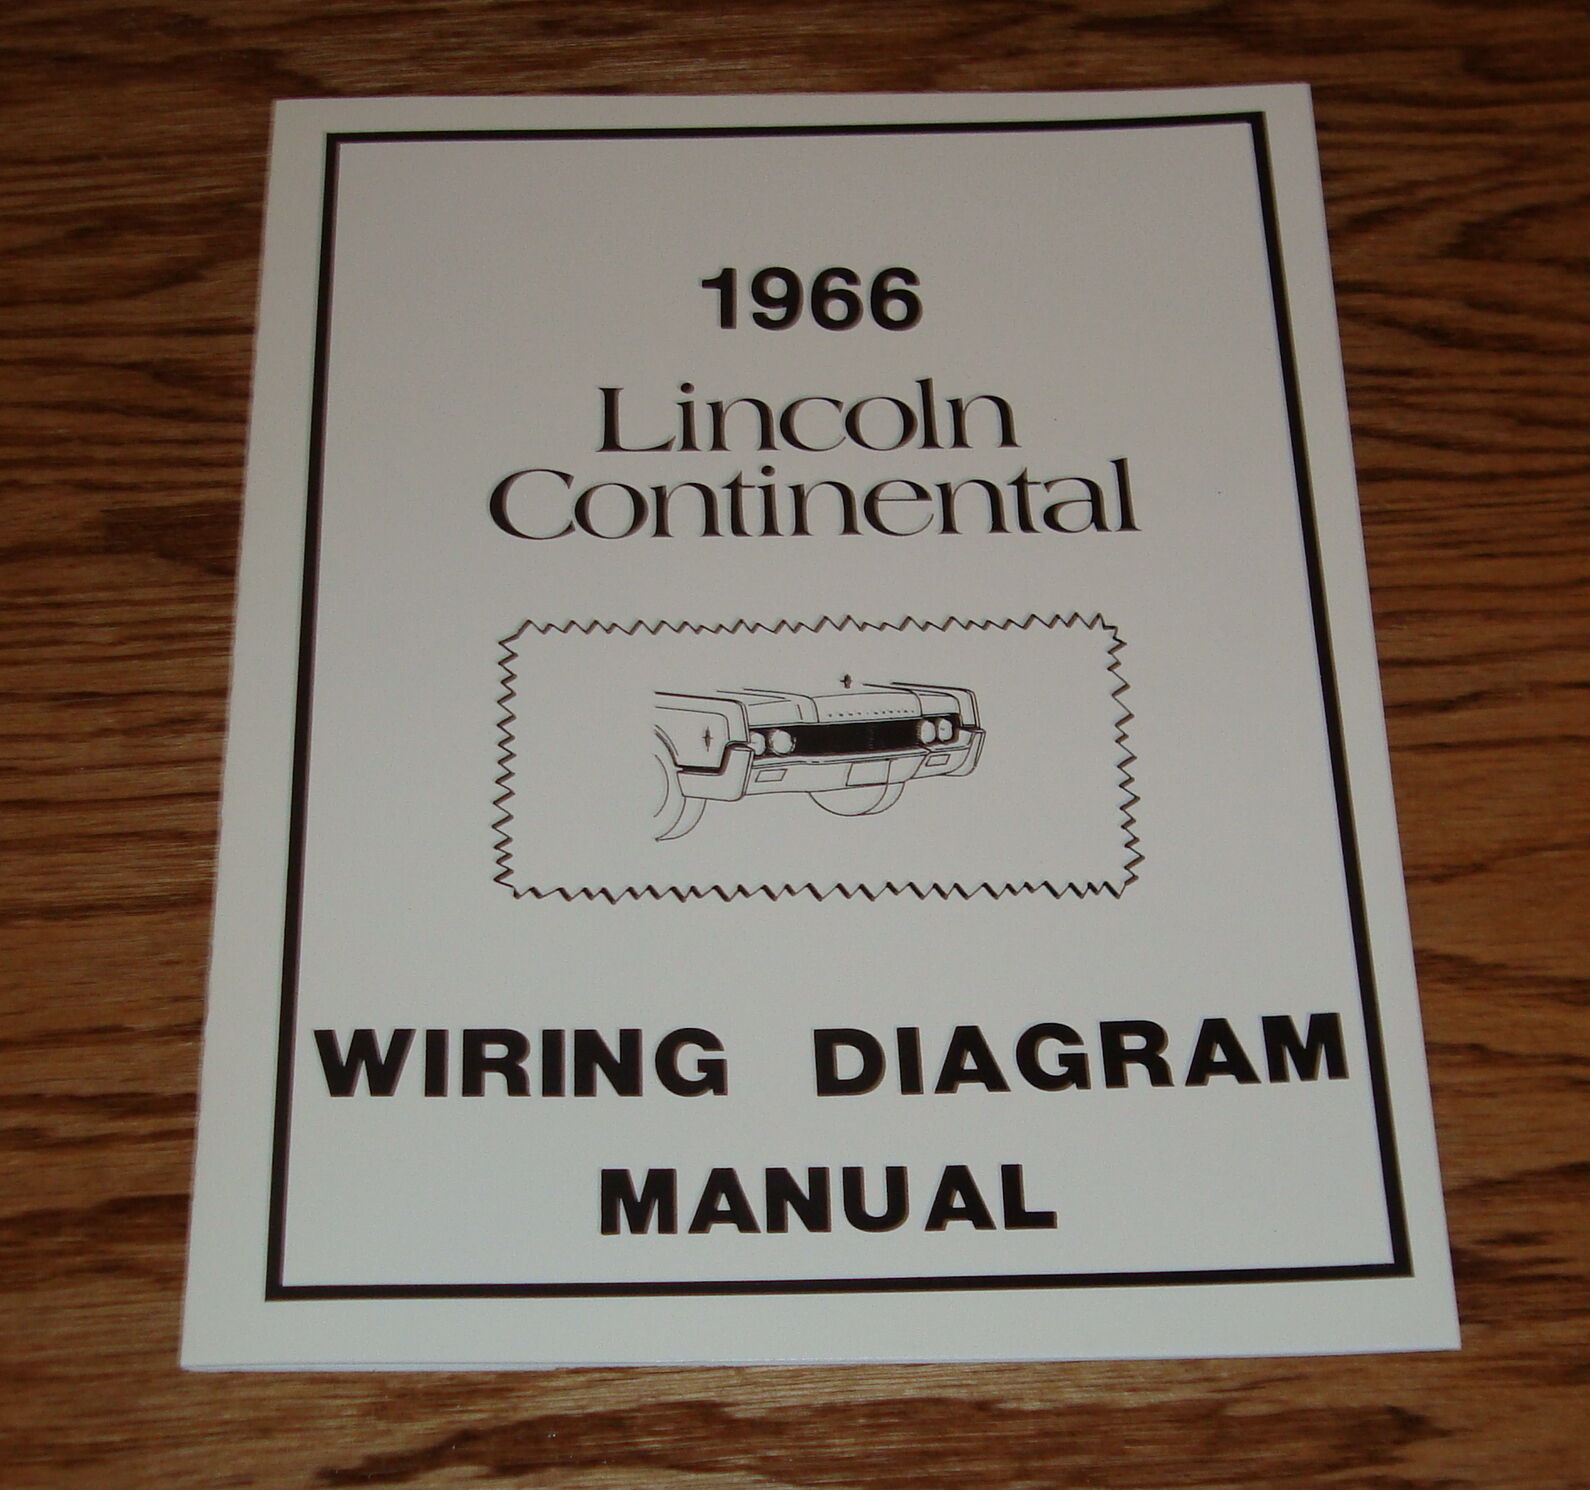 1966 Lincoln Continental Wiring Diagram Manual 66